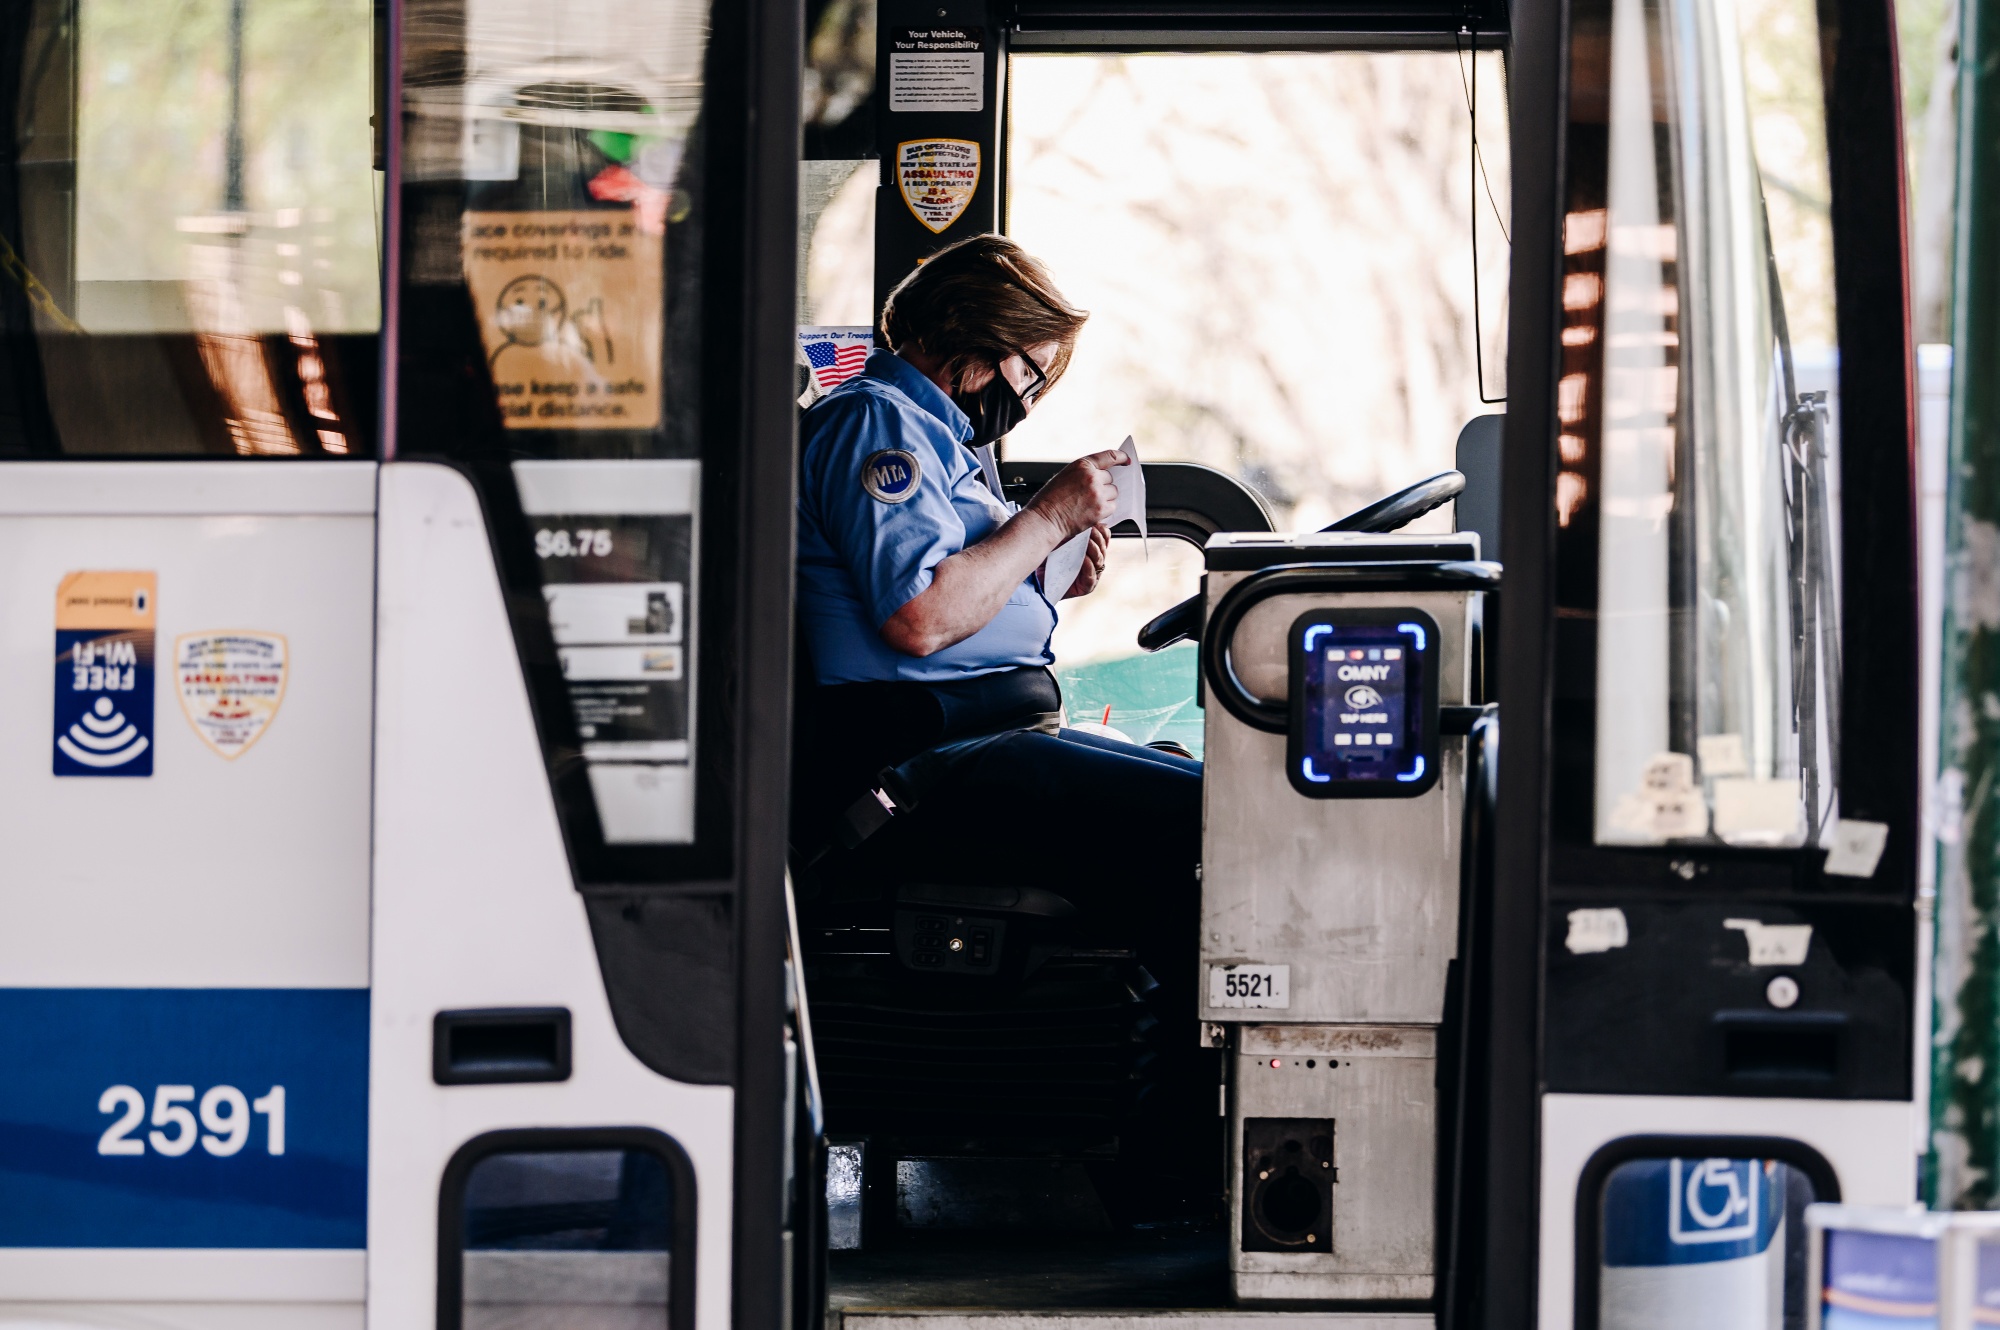 America’s Bus Driver Shortage Has Left Transit Systems in Crisis